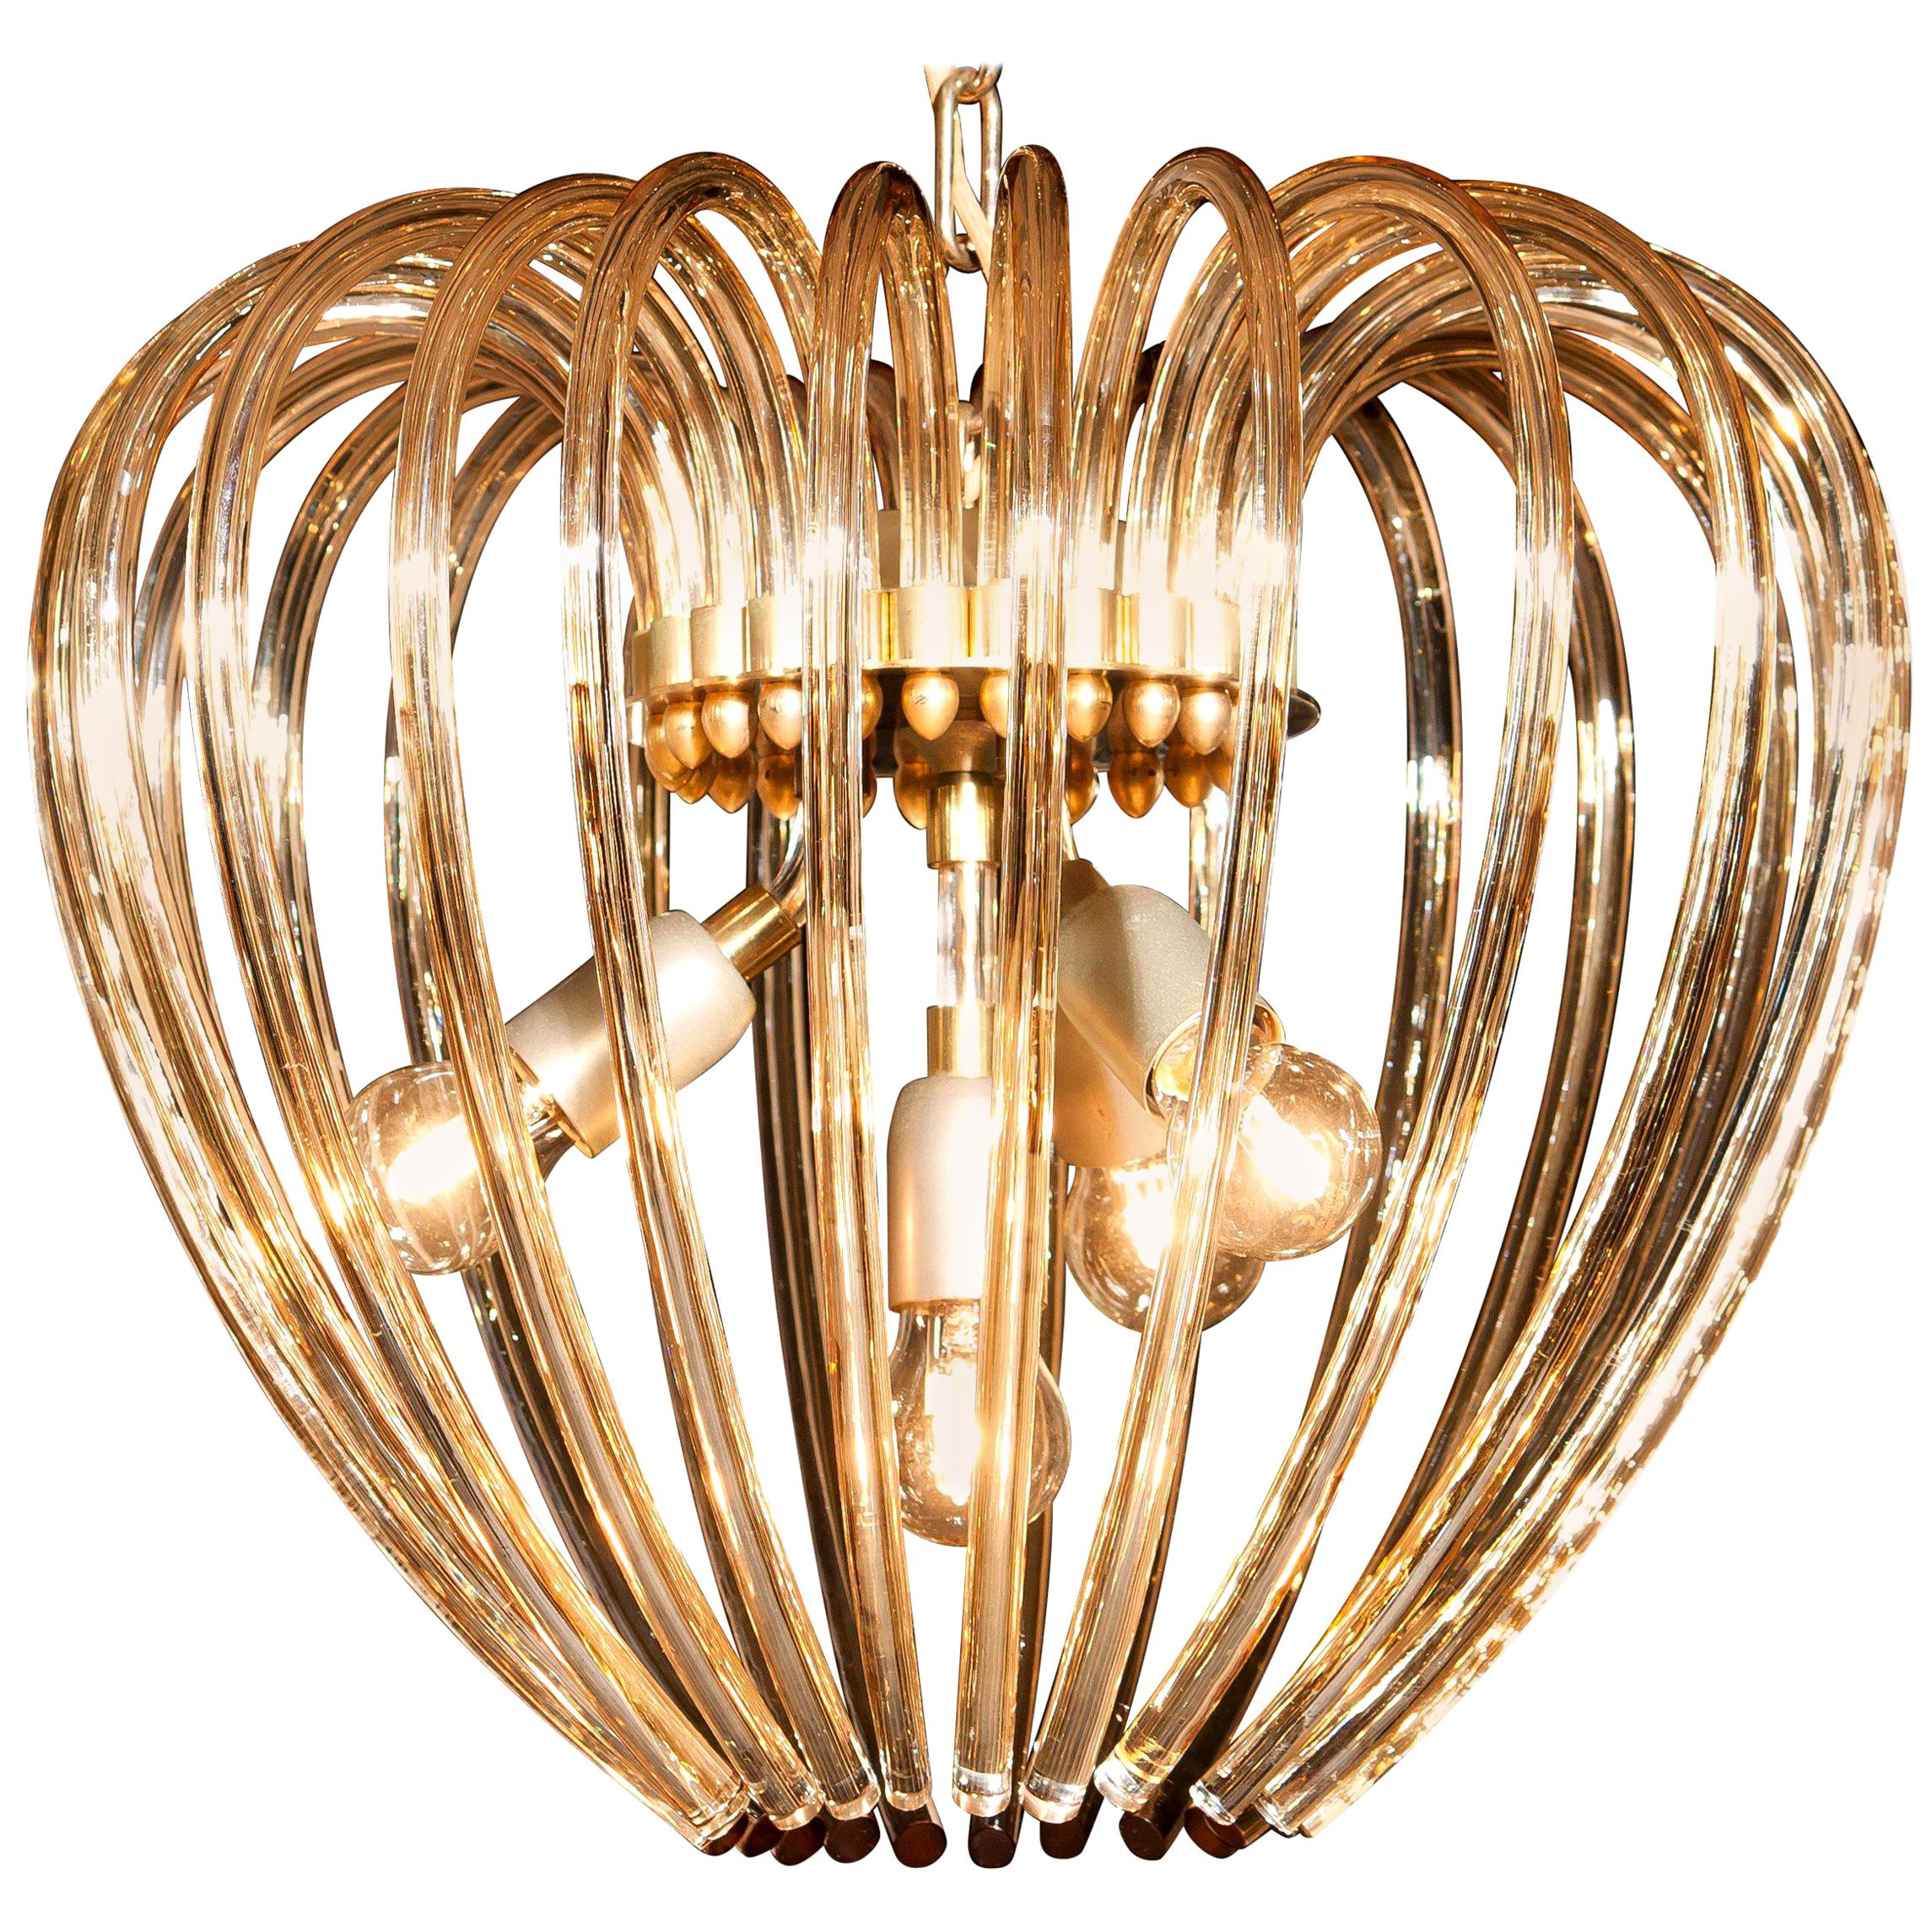 Lovely chandelier by Murano, Italy.
This lamp has a beautiful heart shape made of gilded crystal elements.
It is in excellent condition.
Period 1960s.
Dimension: Total height 90cm, ø 50 cm.